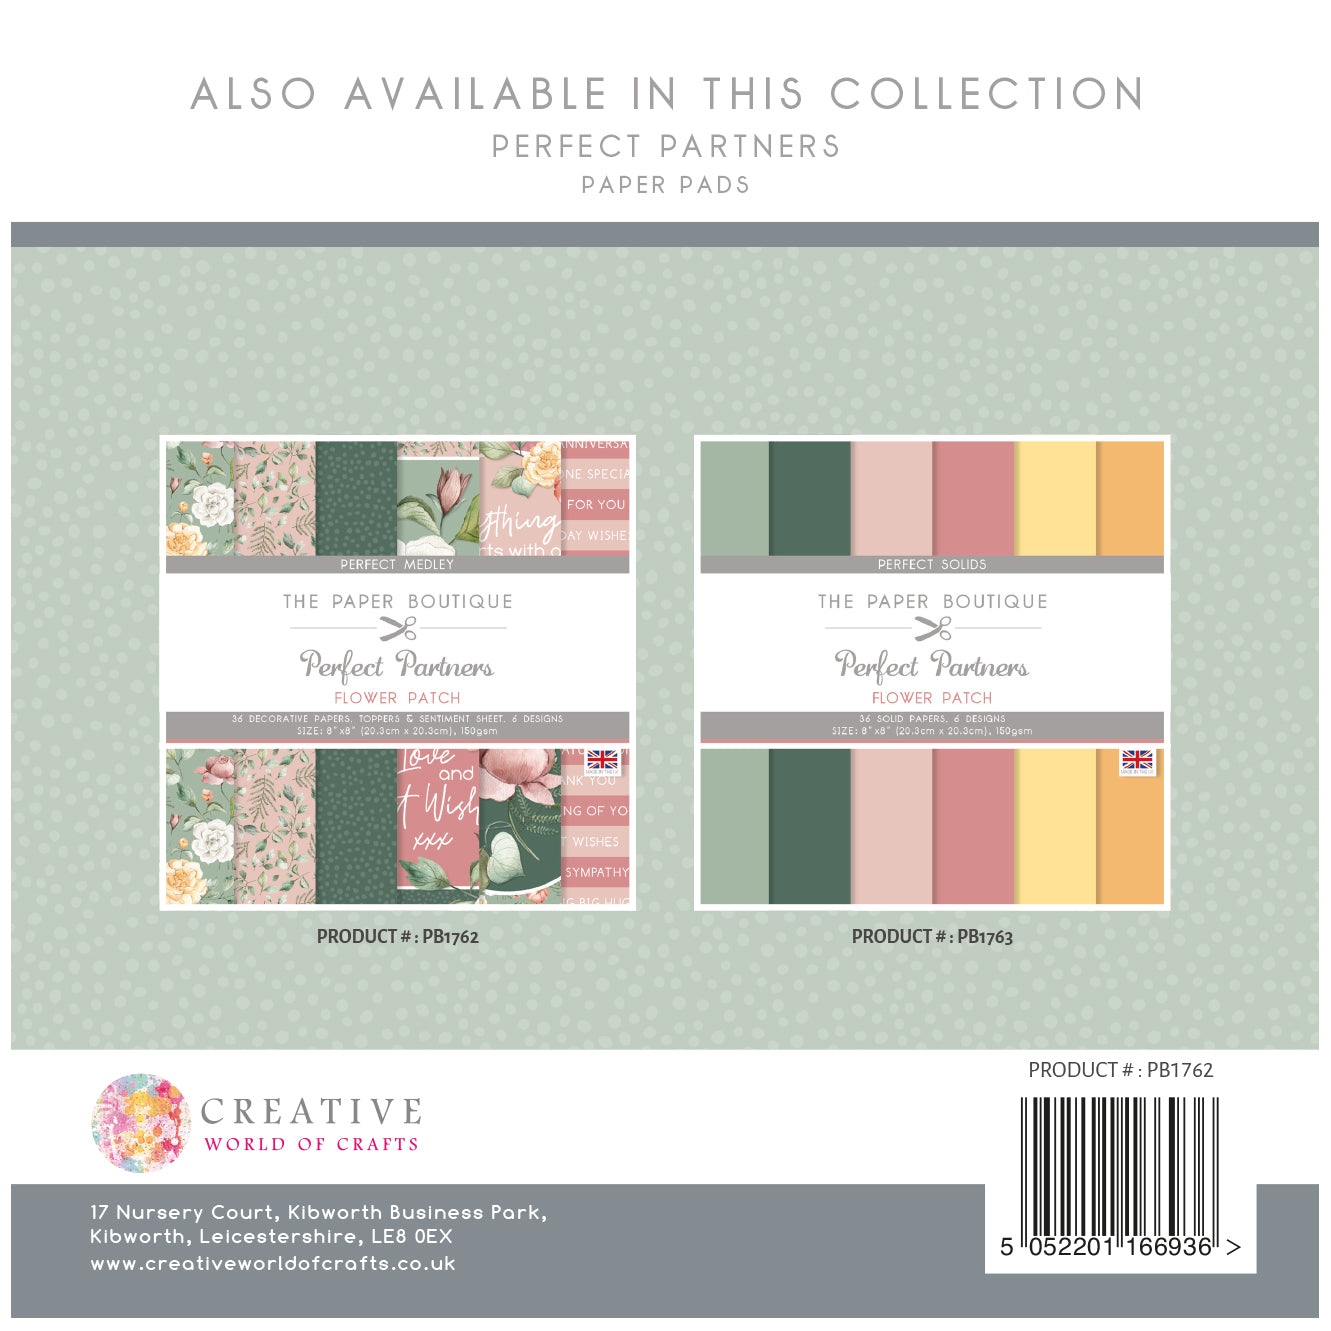 The Paper Boutique Perfect Partners Flower Patch 8 in x 8 in Medley